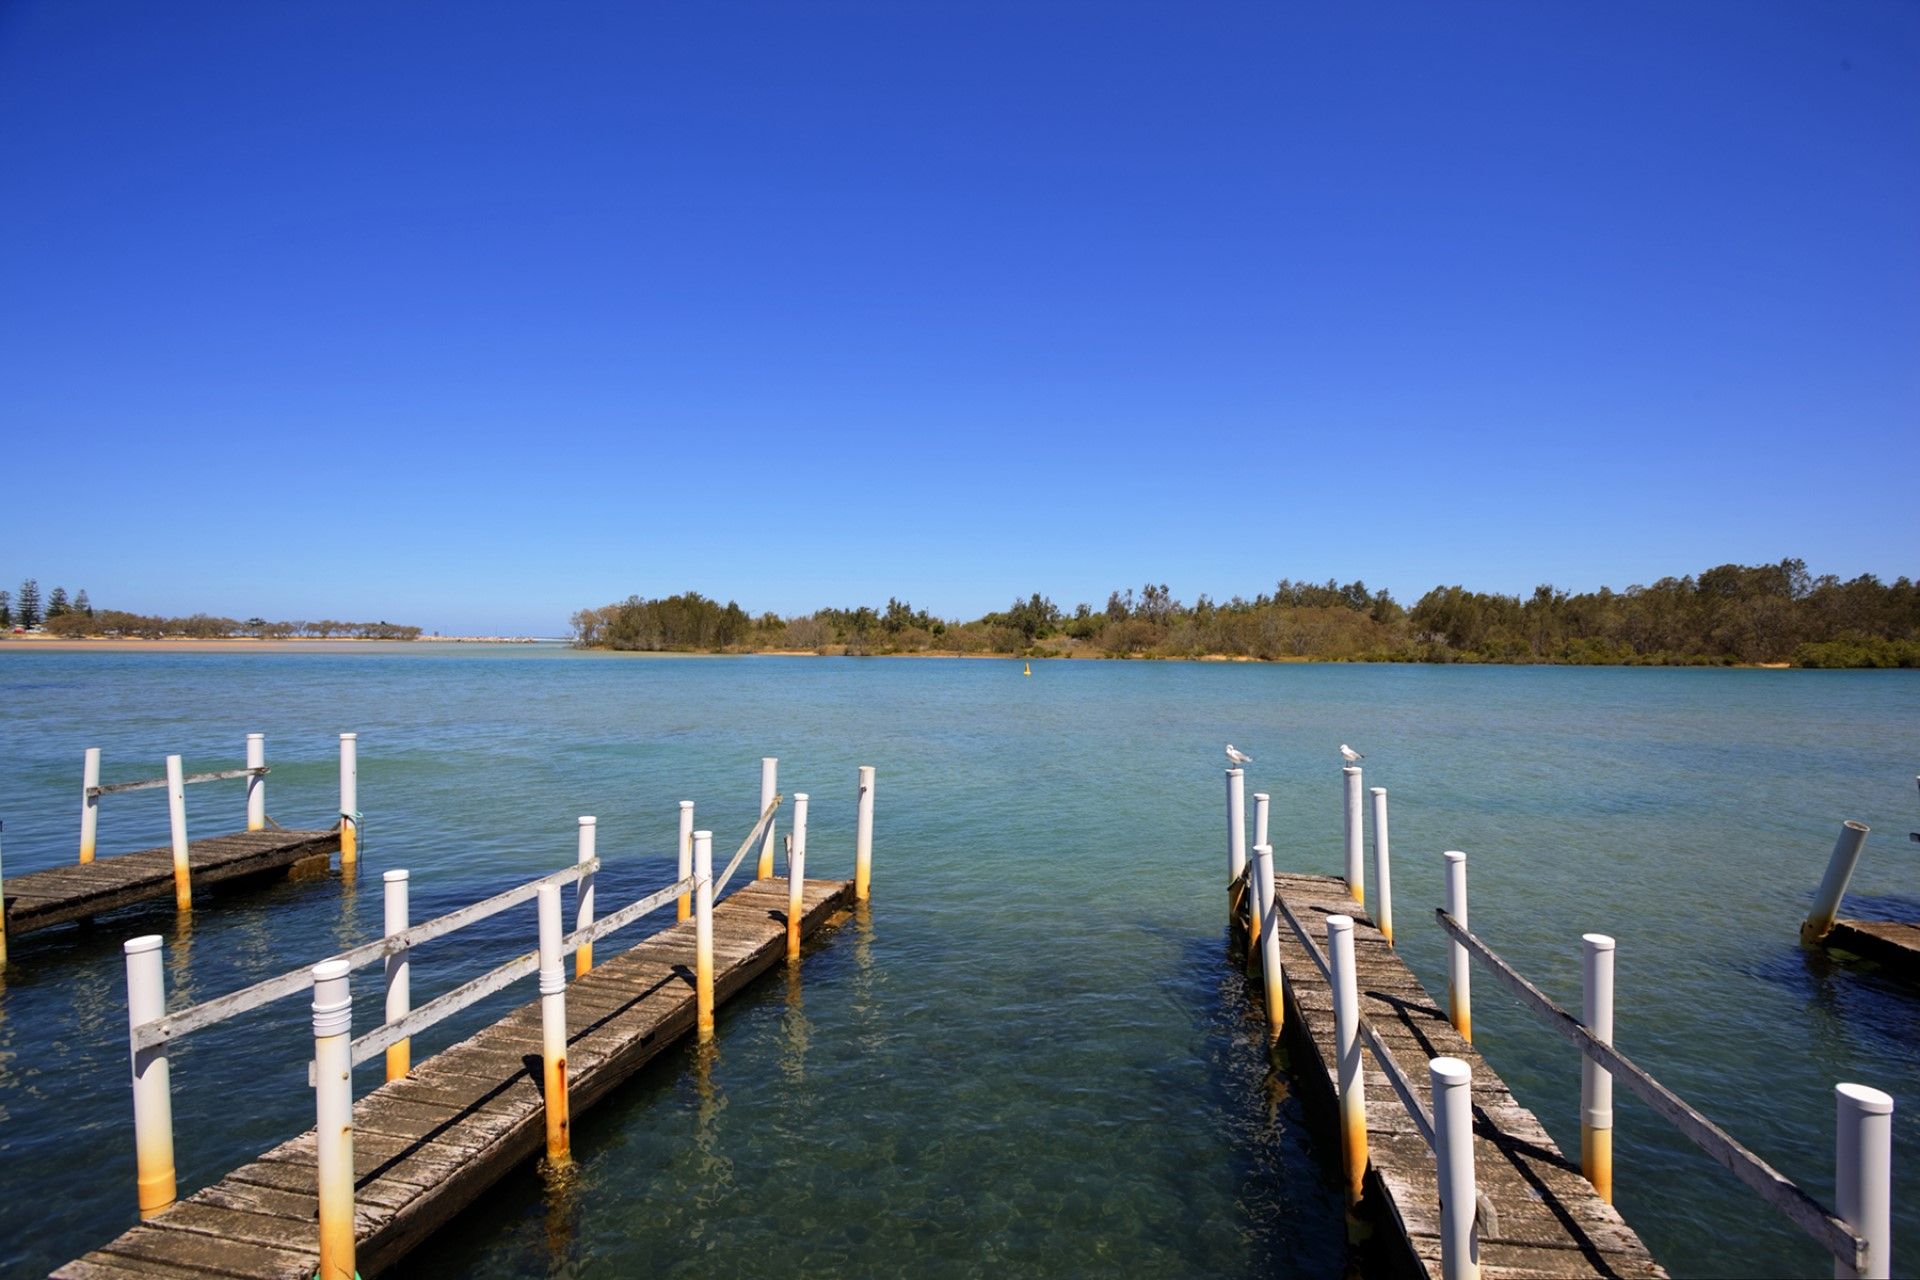 Nambucca Heads Real Estate: The Quayside